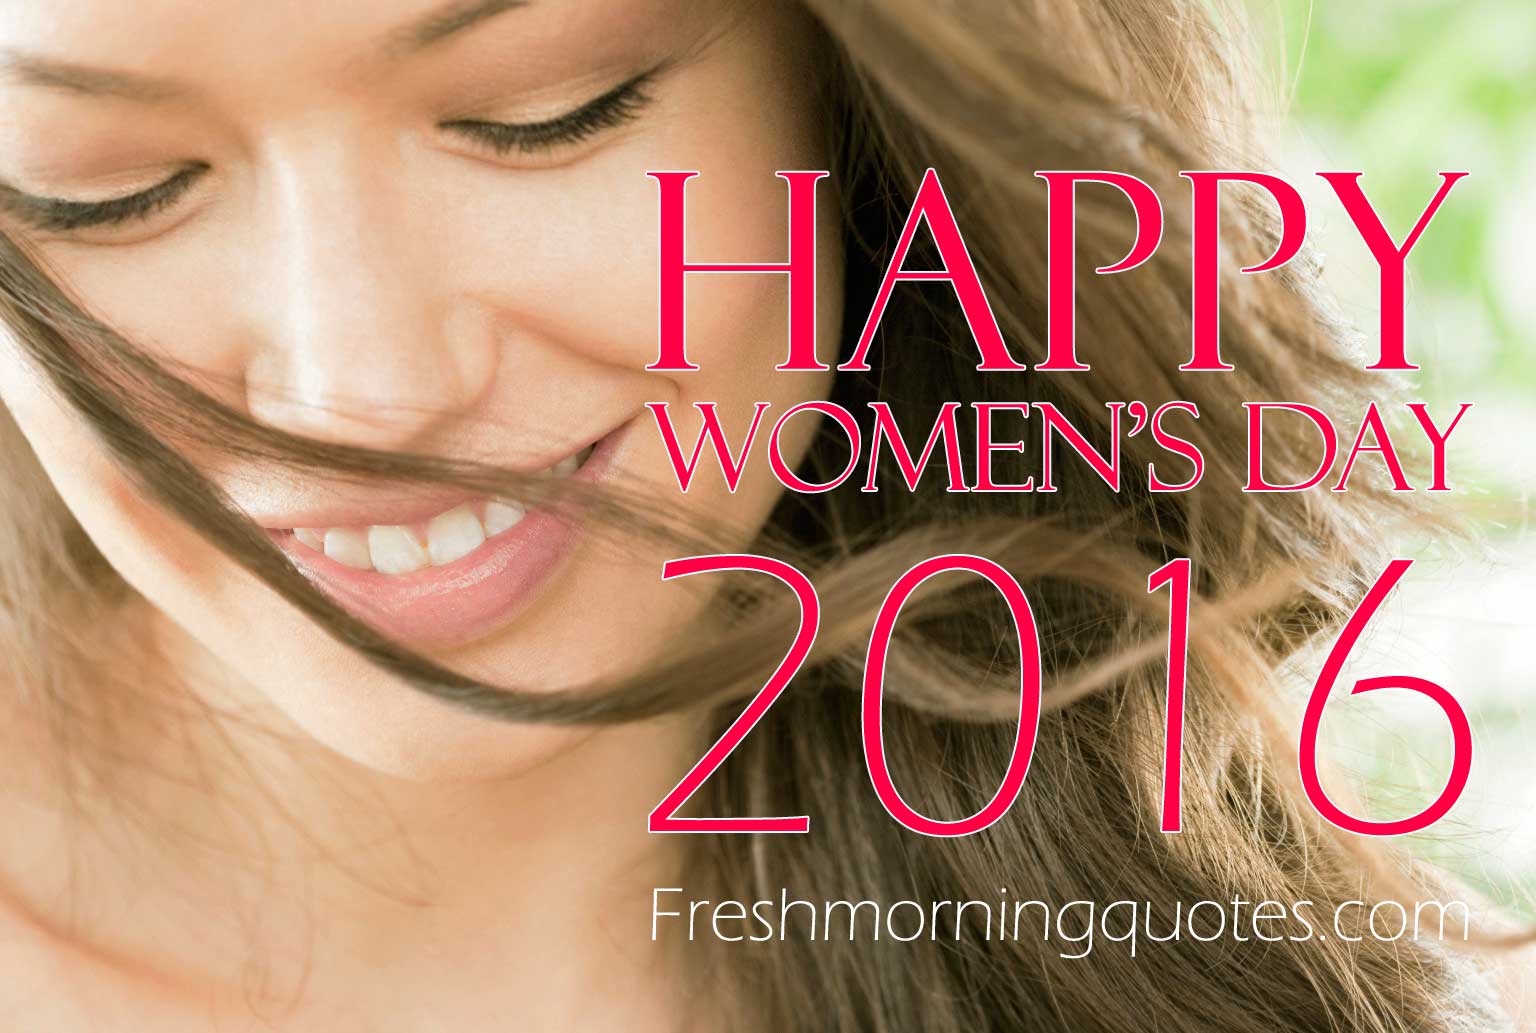 Happy Women's Day Images for Women's Day 2018 - Freshmorningquotes